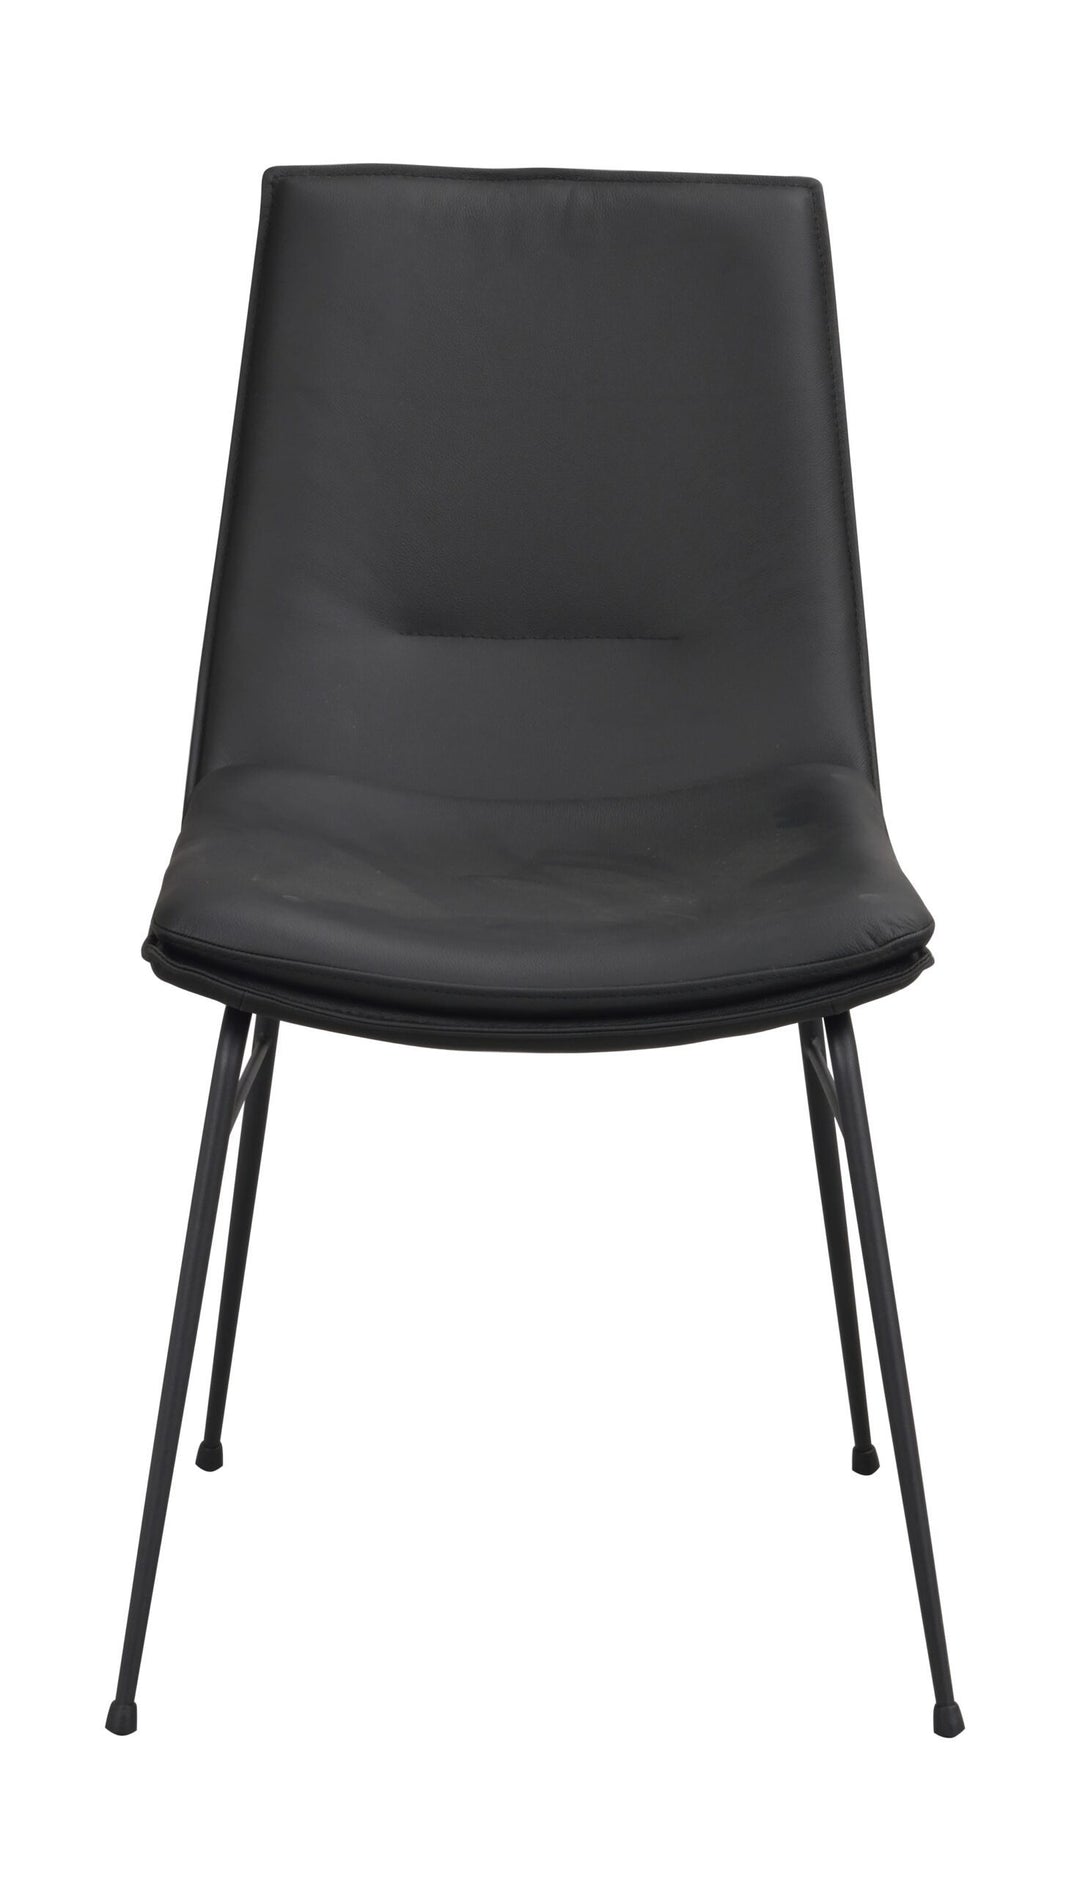 120255_a_Lowell_chair_black_leather